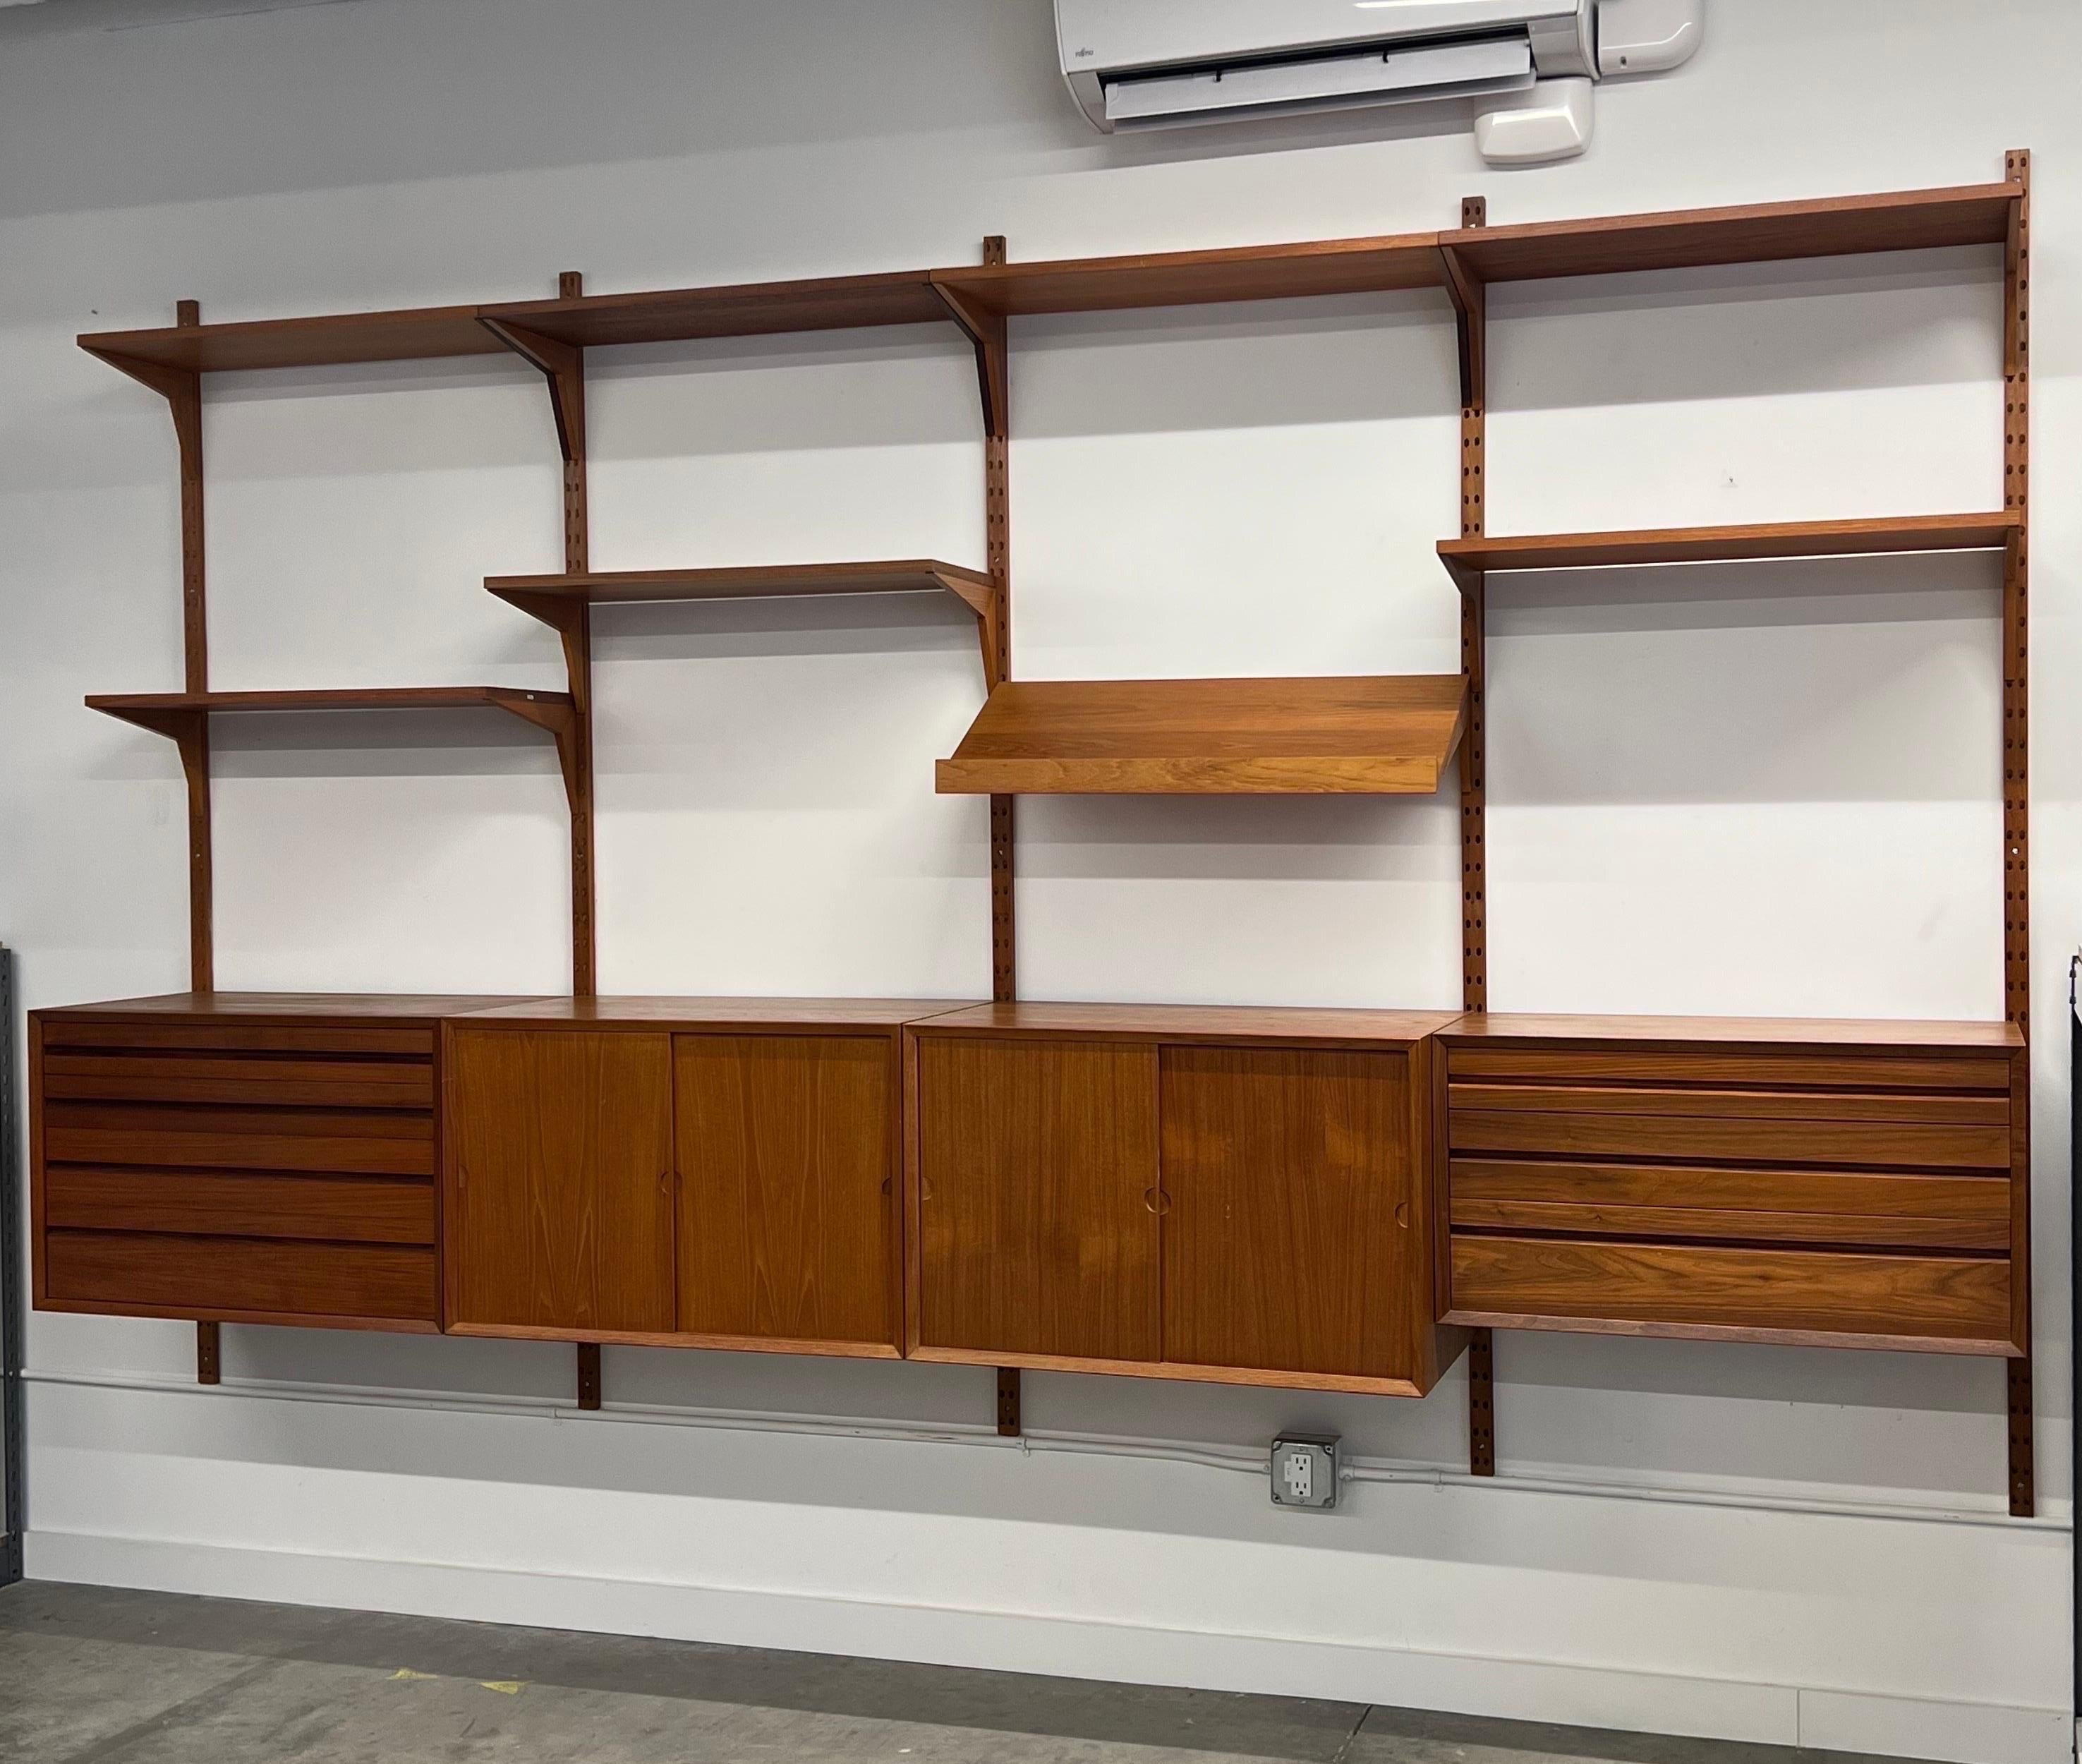 Mid-century iconic wall unit designed by Poul Cadovius, Denmark or often referred to as the “Cado” wall unit. This configuration features four cases, one magazine rack, and seven open shelves. The four-bay is made from teak wood with impressive